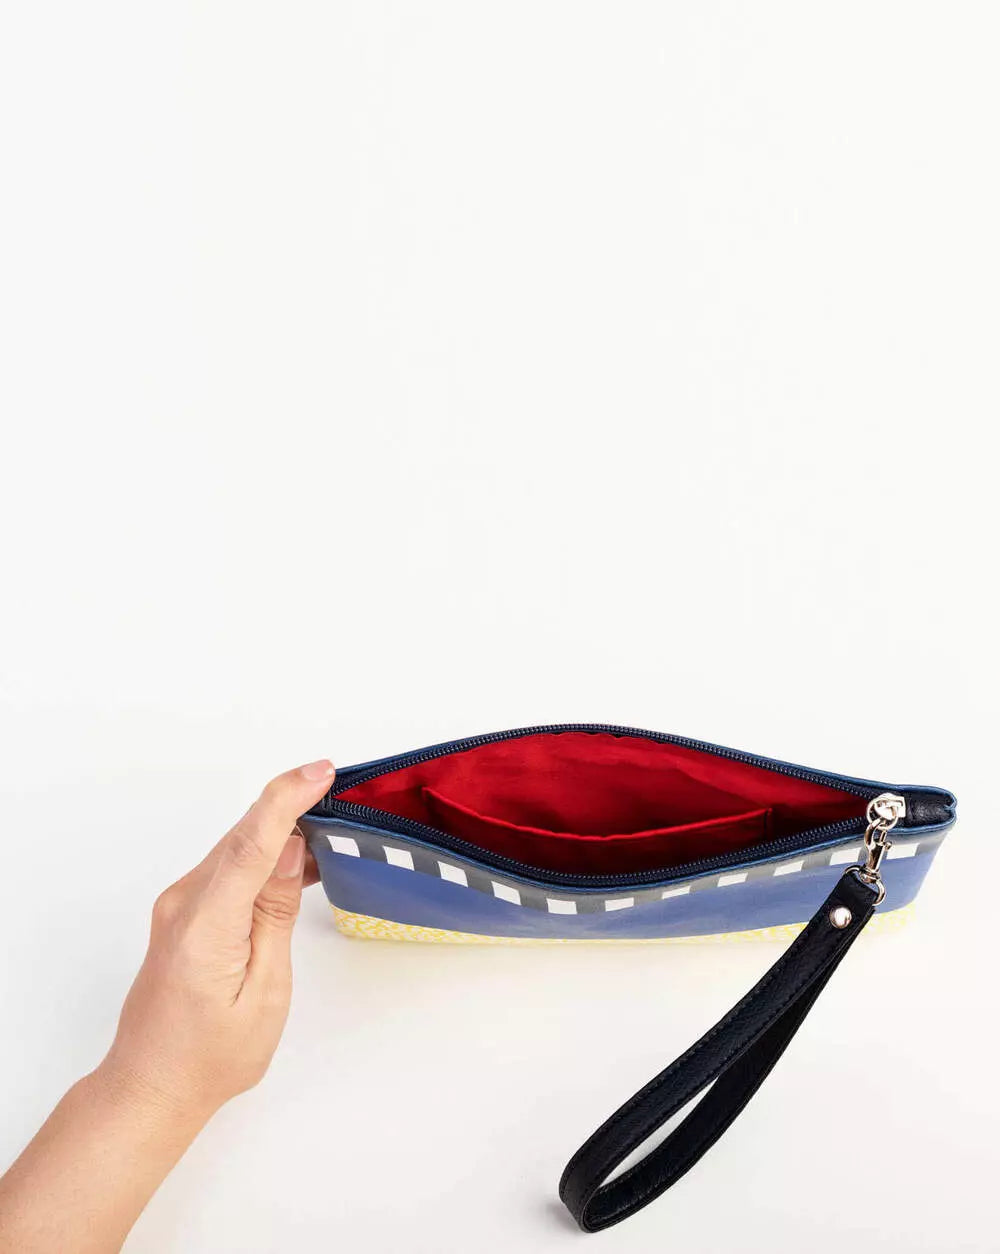 Forever is Boring Hop Pebbles YL Clutch with details from inside, wild red lining and one inner pocket.